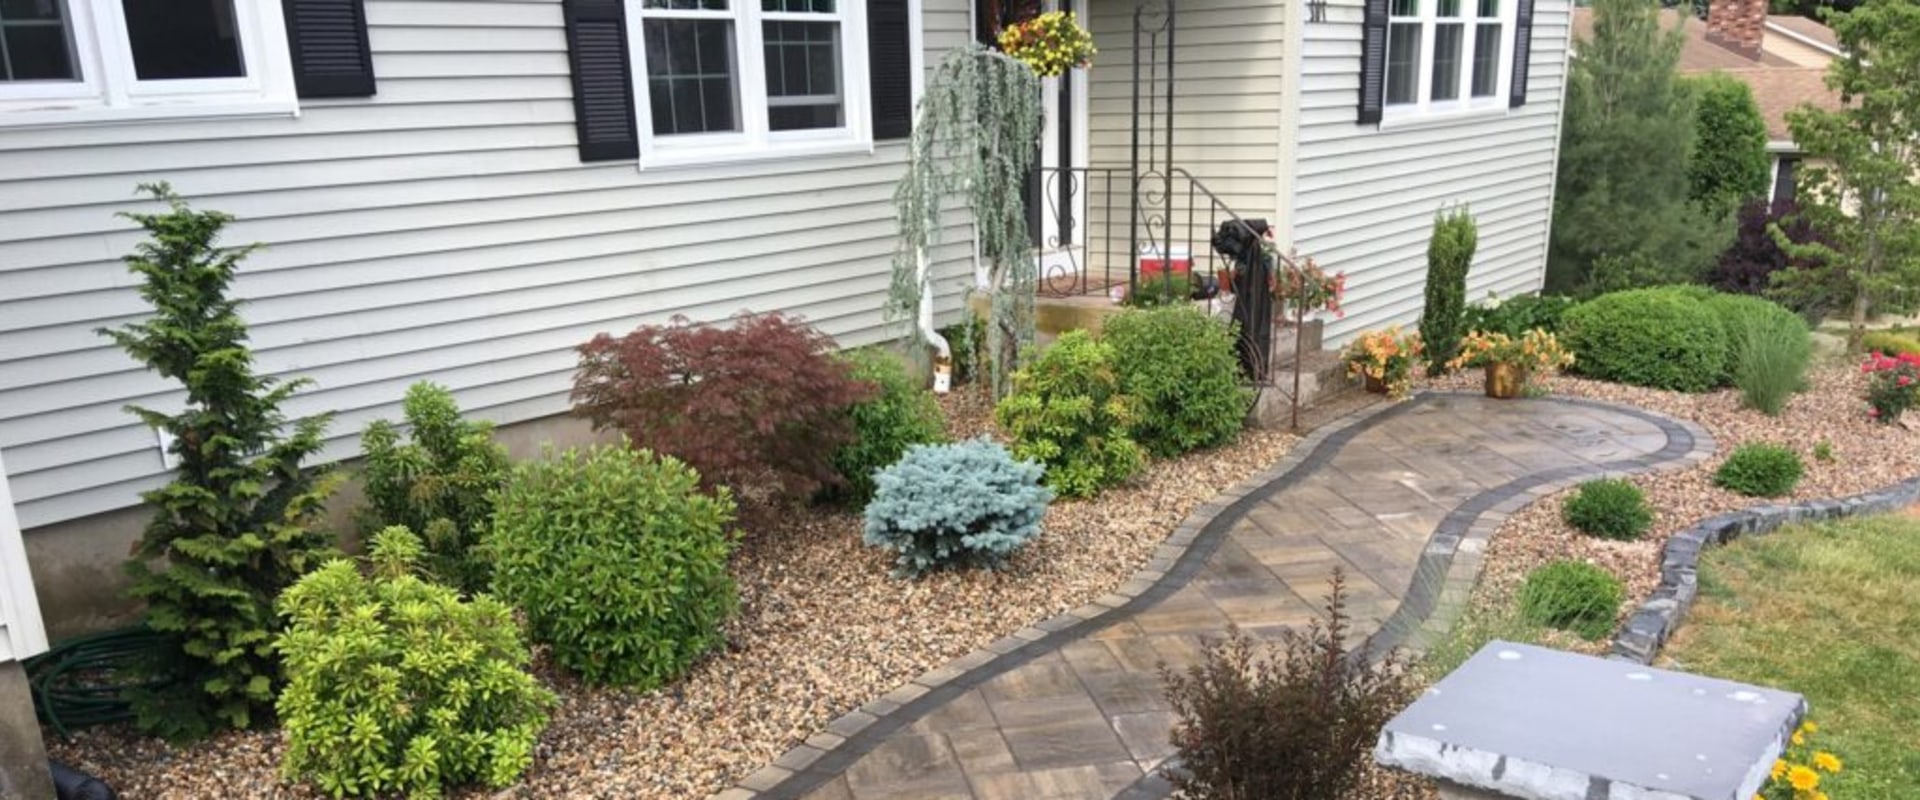 How much value does good landscaping add to a house?